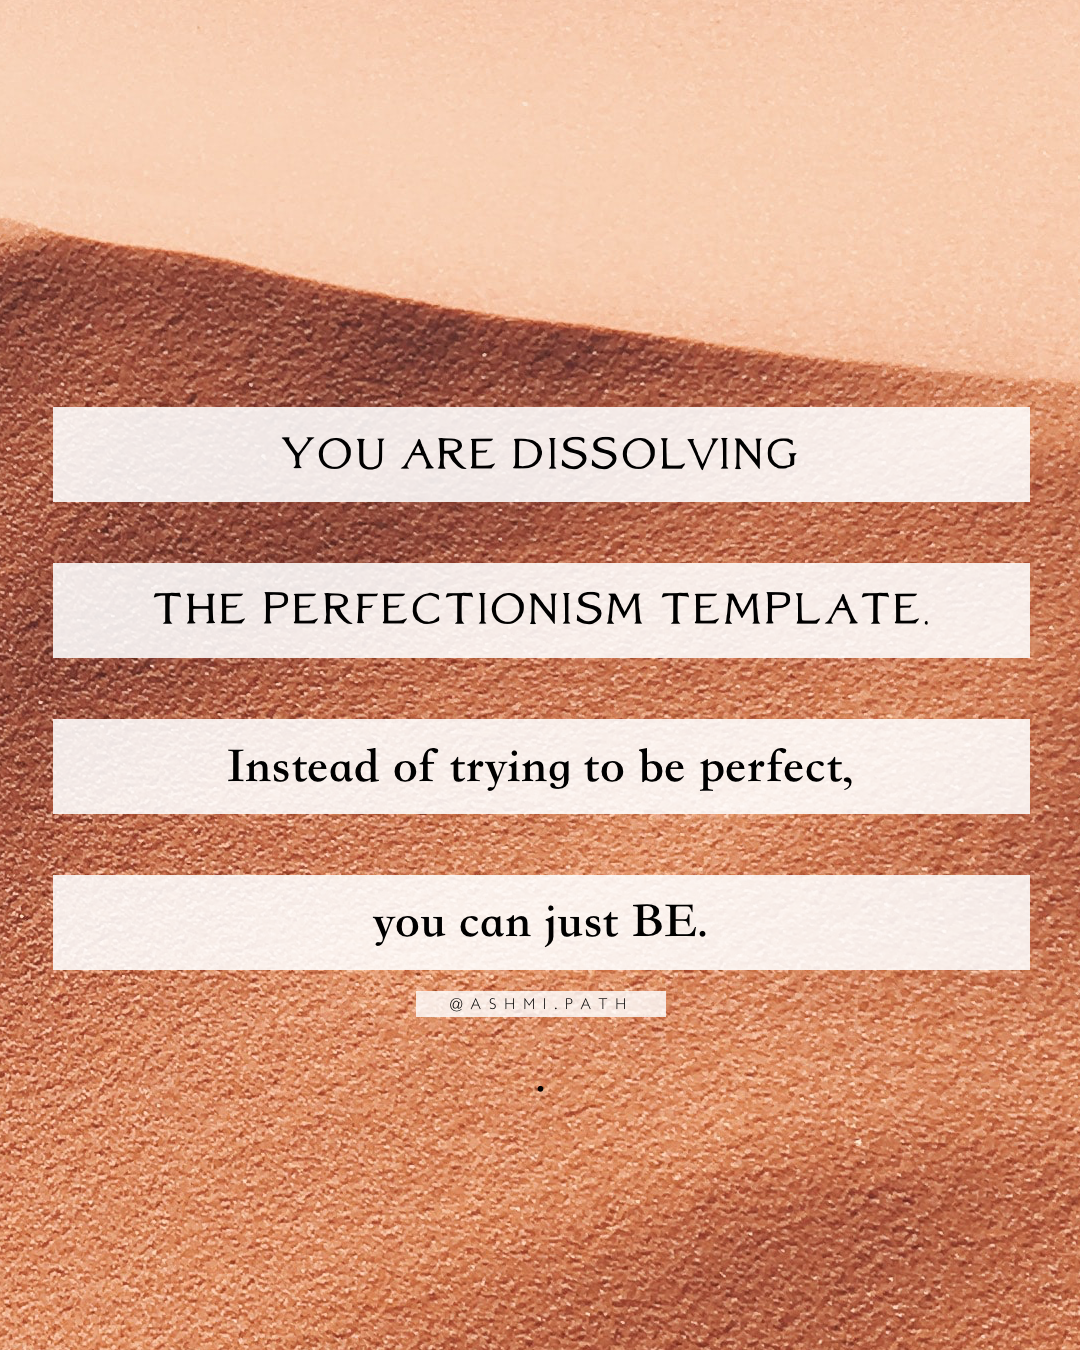 Dissolving the Perfectionism Template